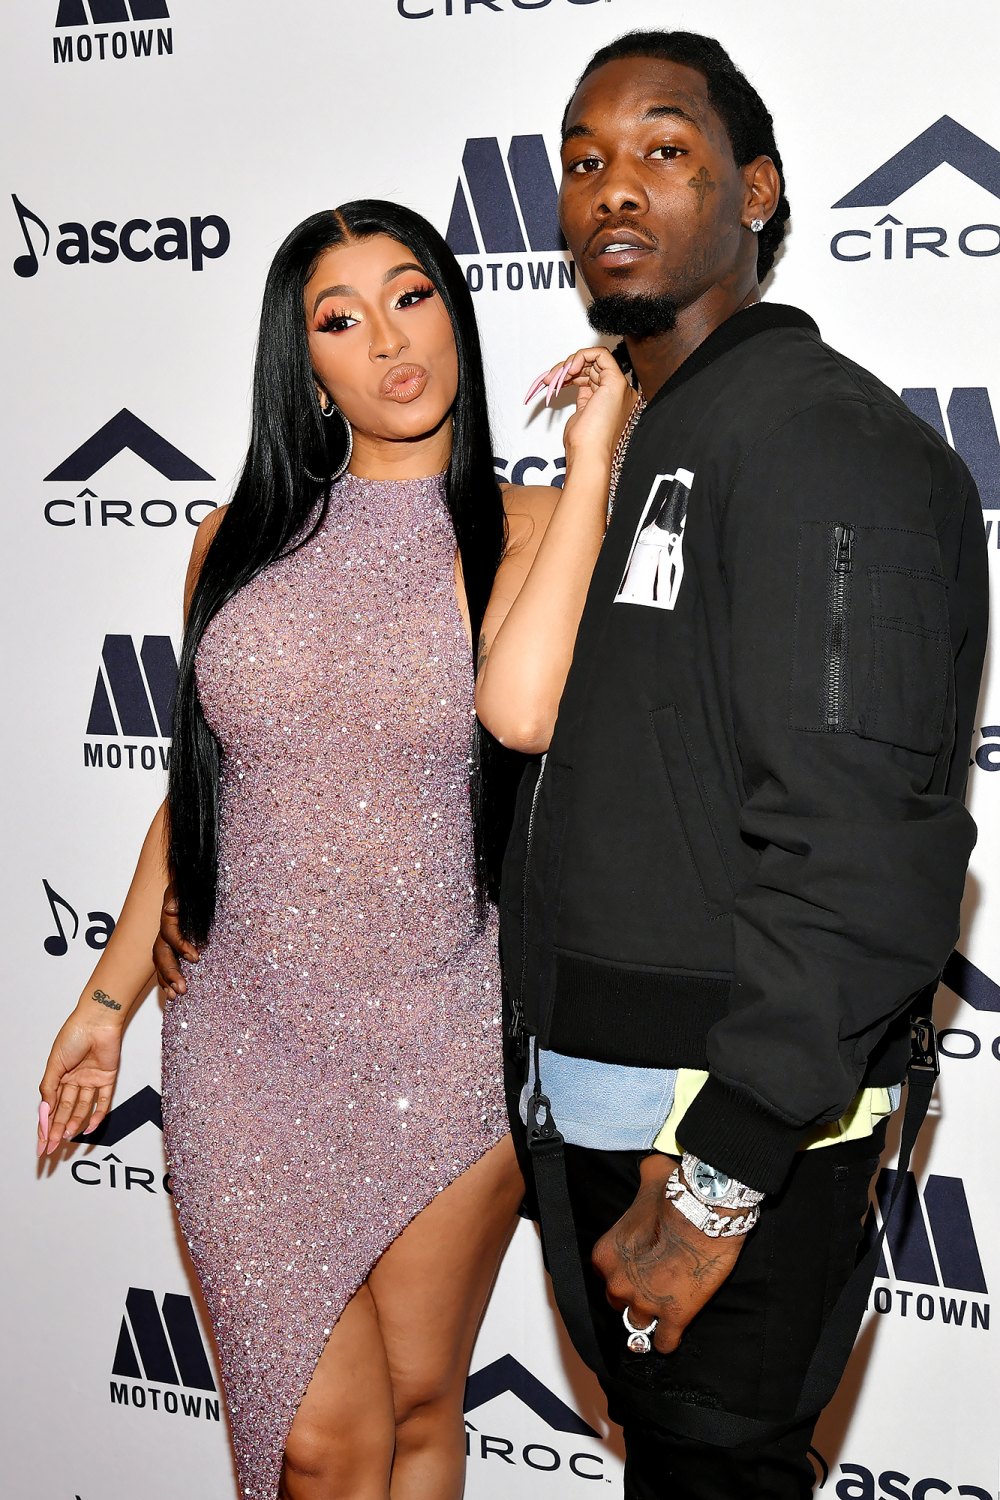 Cardi B Confesses She and Ex Offset Hooked up on New Year's Eve — But They're Not Back Together